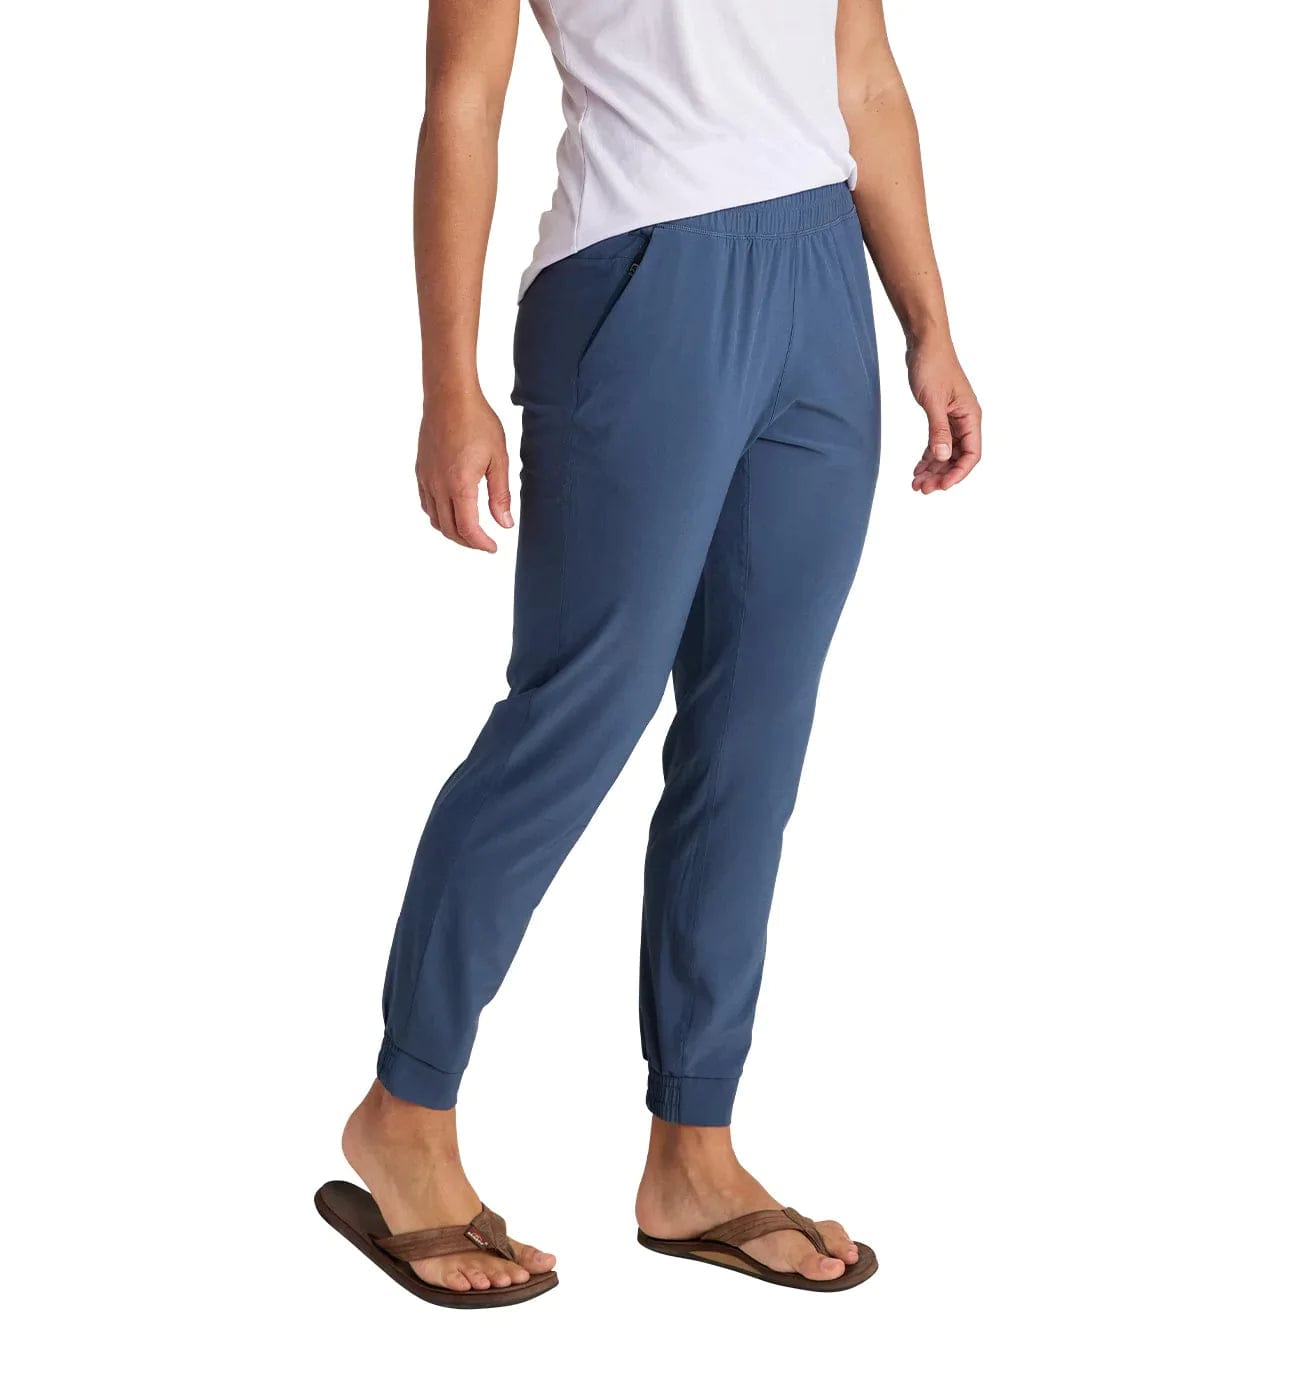 Free Fly Women's Breeze Pull-On Jogger - Pacific Blue - 239 Flies